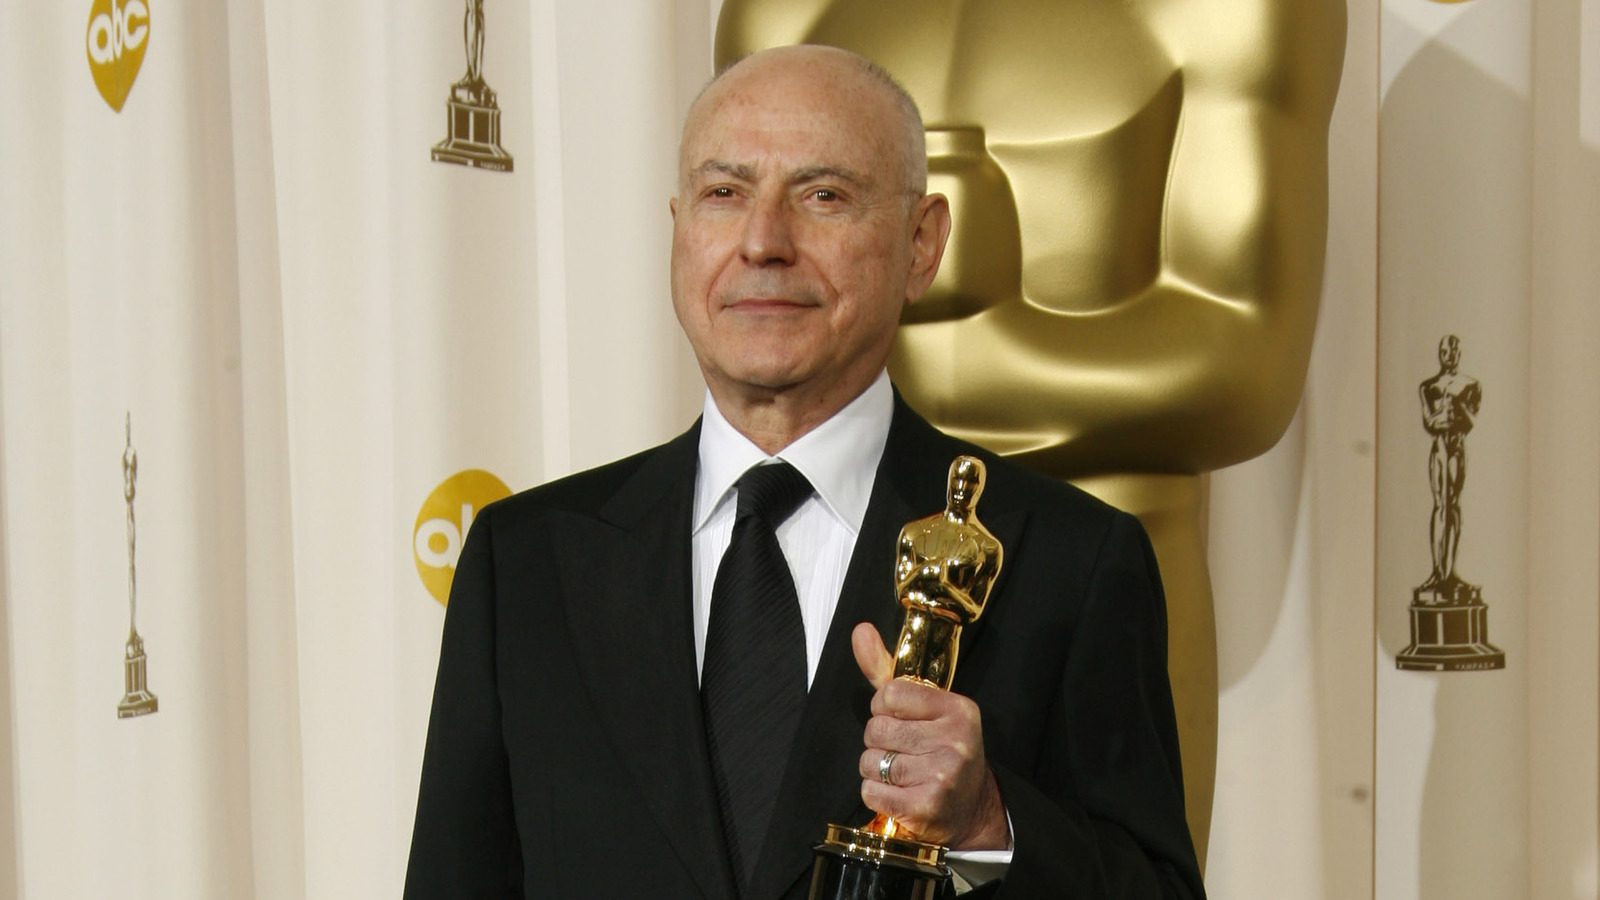 What Was Alan Arkin's Only Academy Award Winning Role And Why Was It So Special?